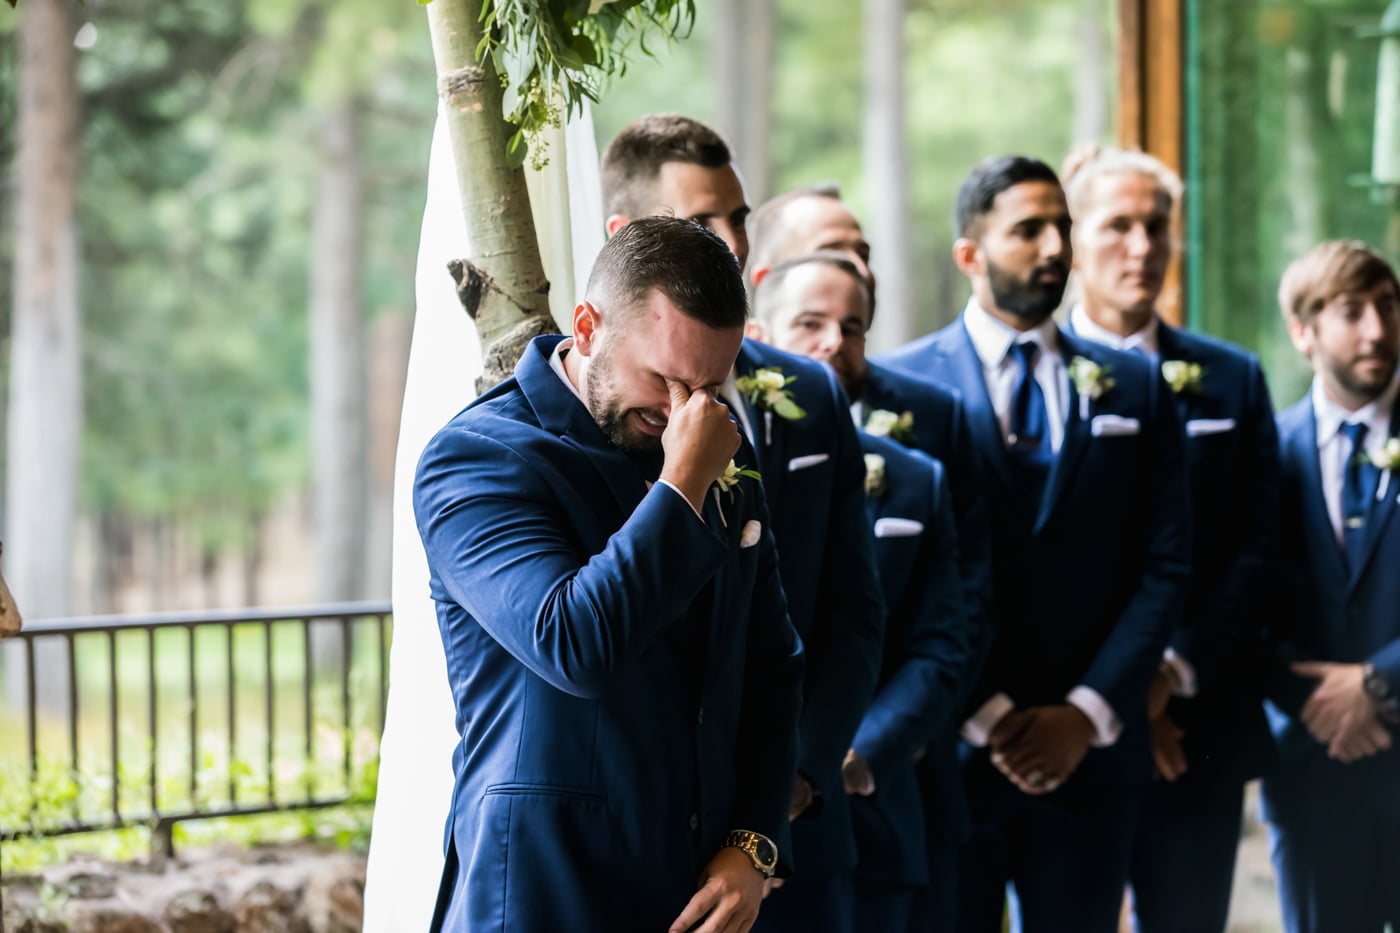 Groom emotional standing with groomsmen at ceremony